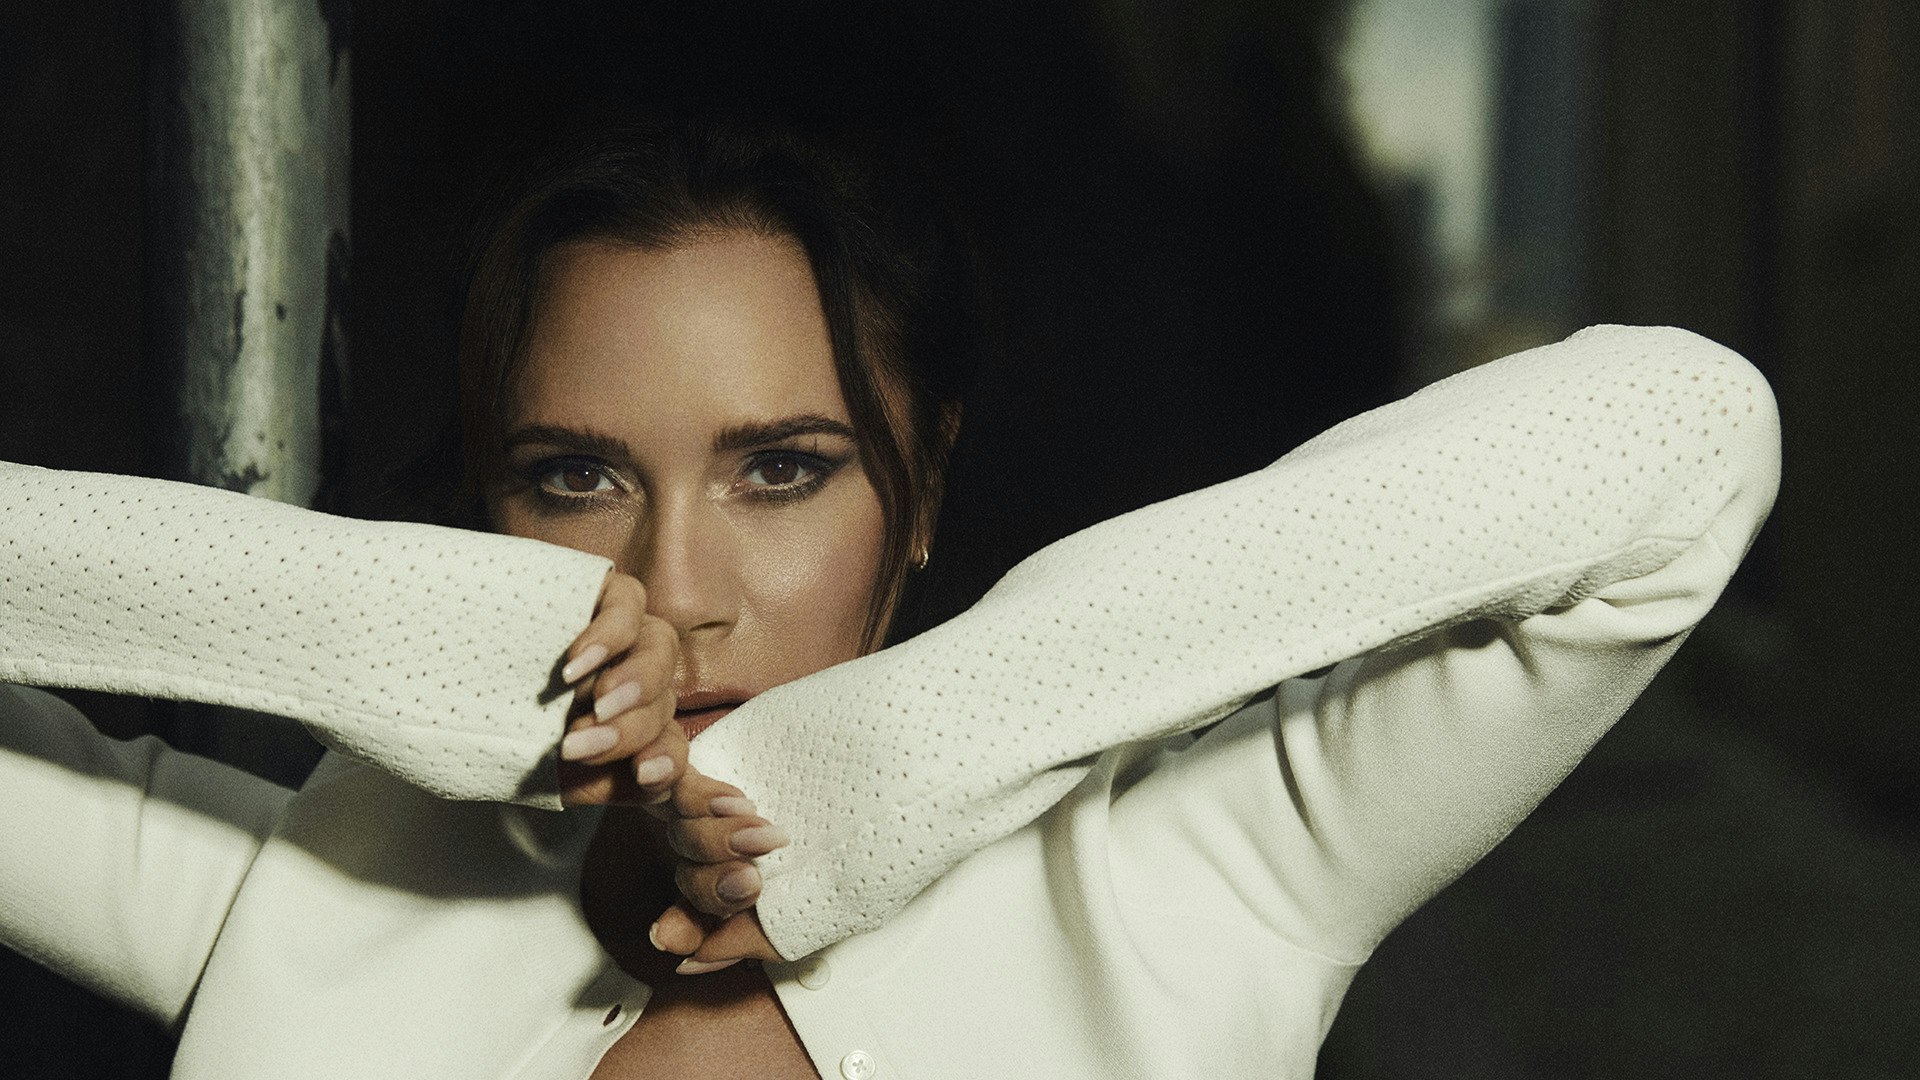 Victoria Beckham At 50: How She Conquered Her Critics And Came Out On Top